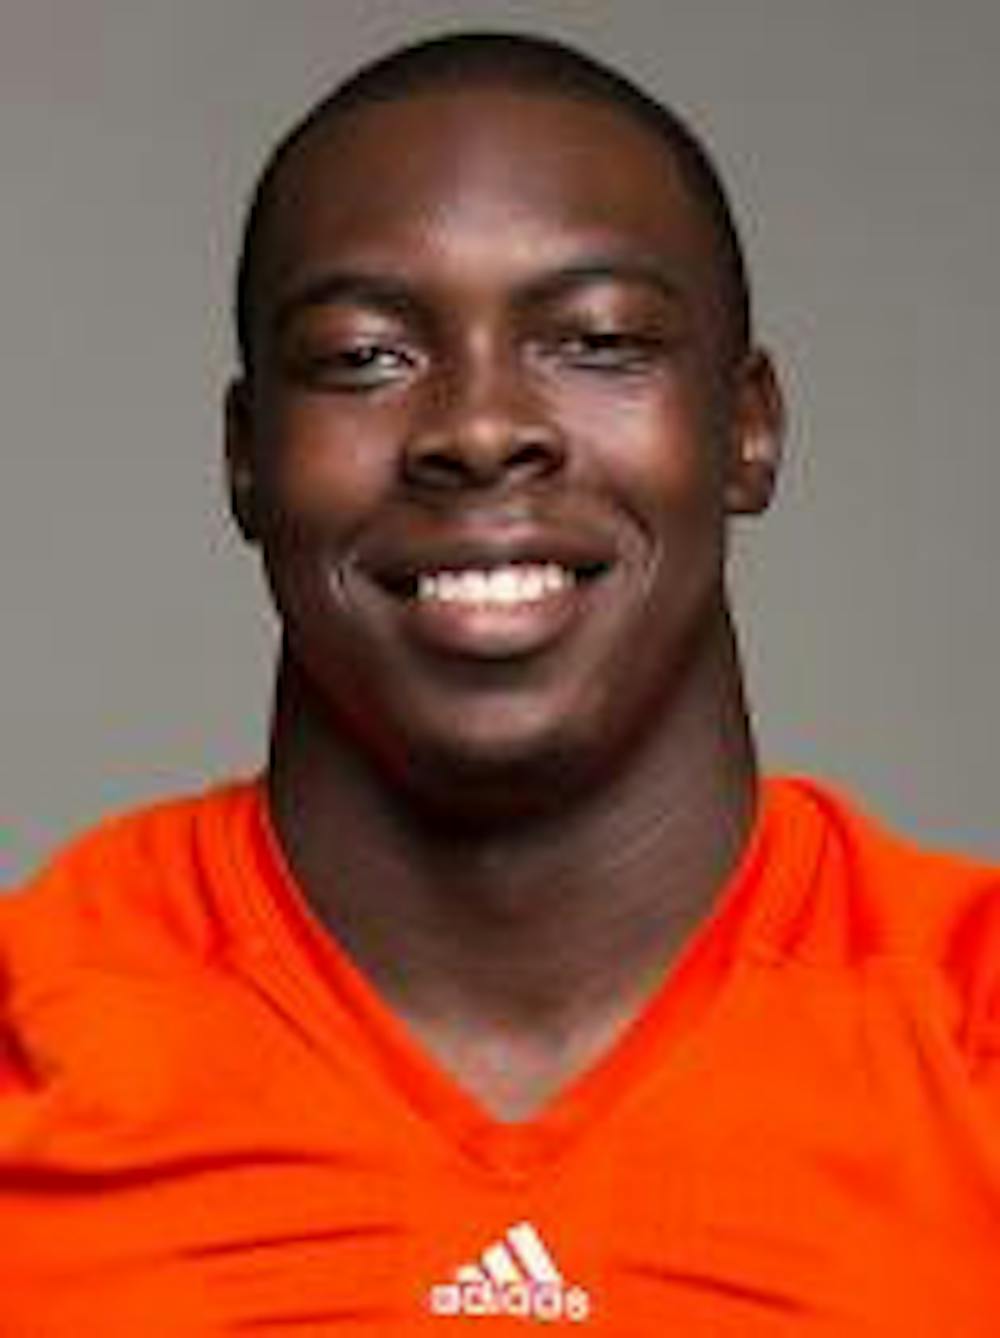 Tosin Aguebor, feeling fully recovered from an injury sustained last year, feels prepared to lead the team as one of the Mercer University football team captains